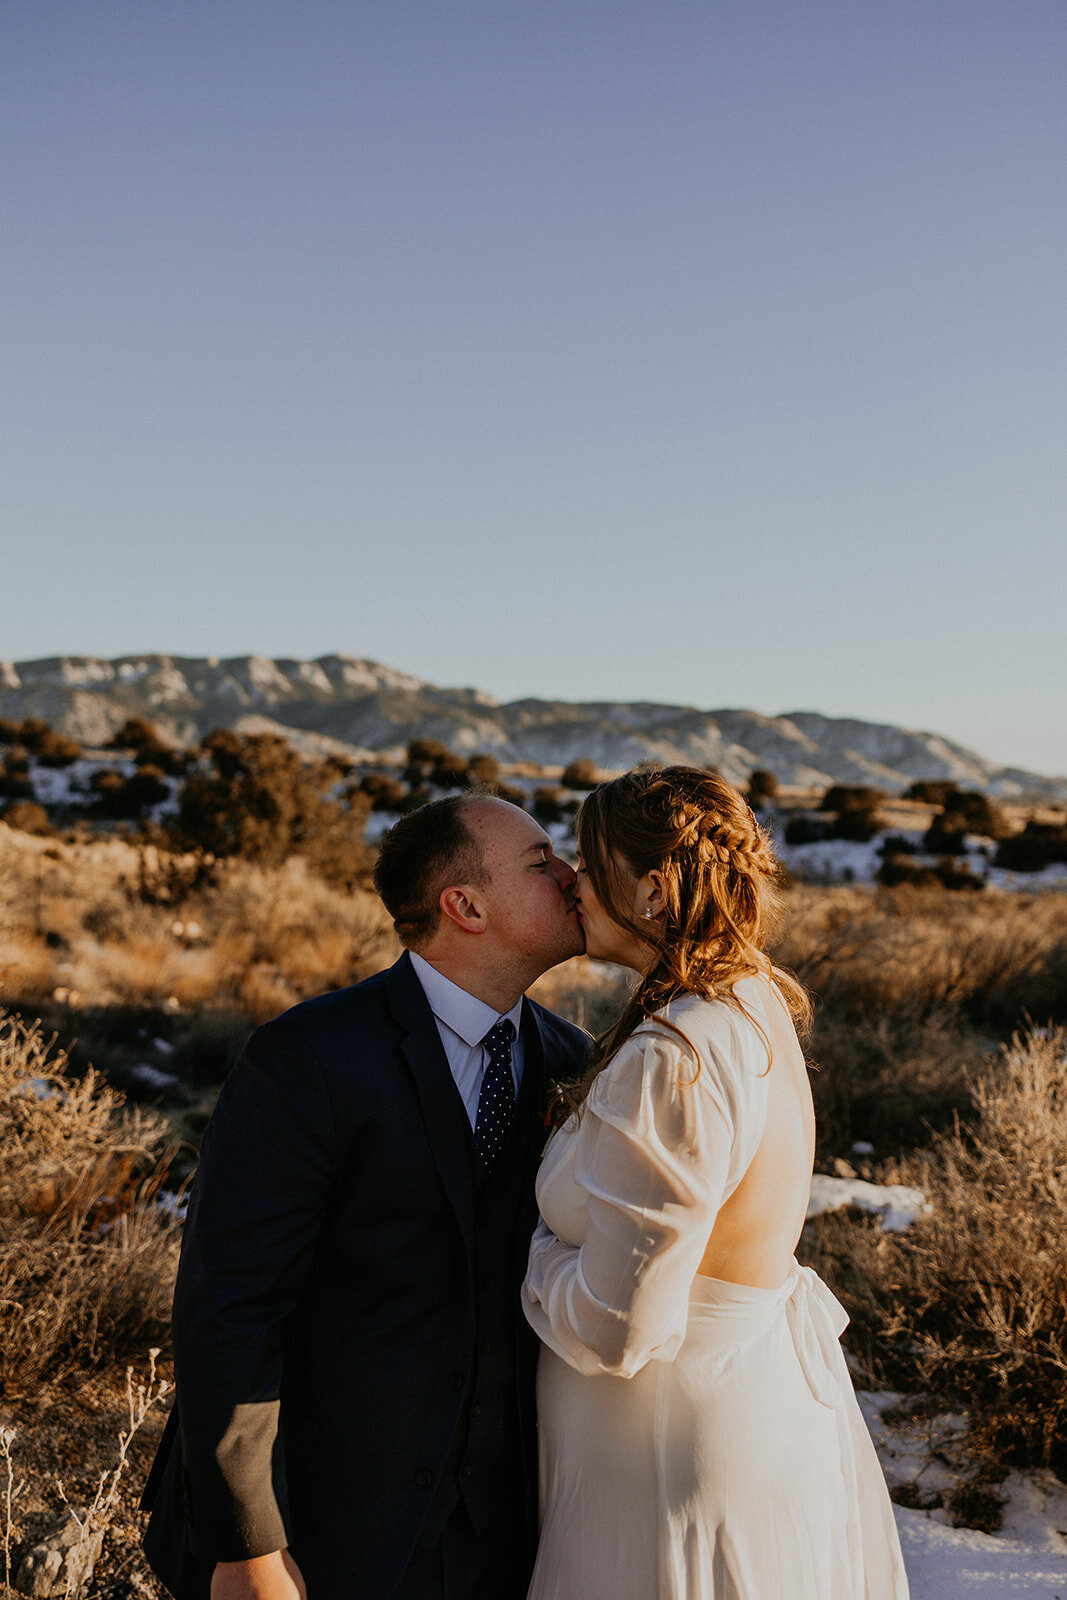 newlyweds about to kiss in the desert